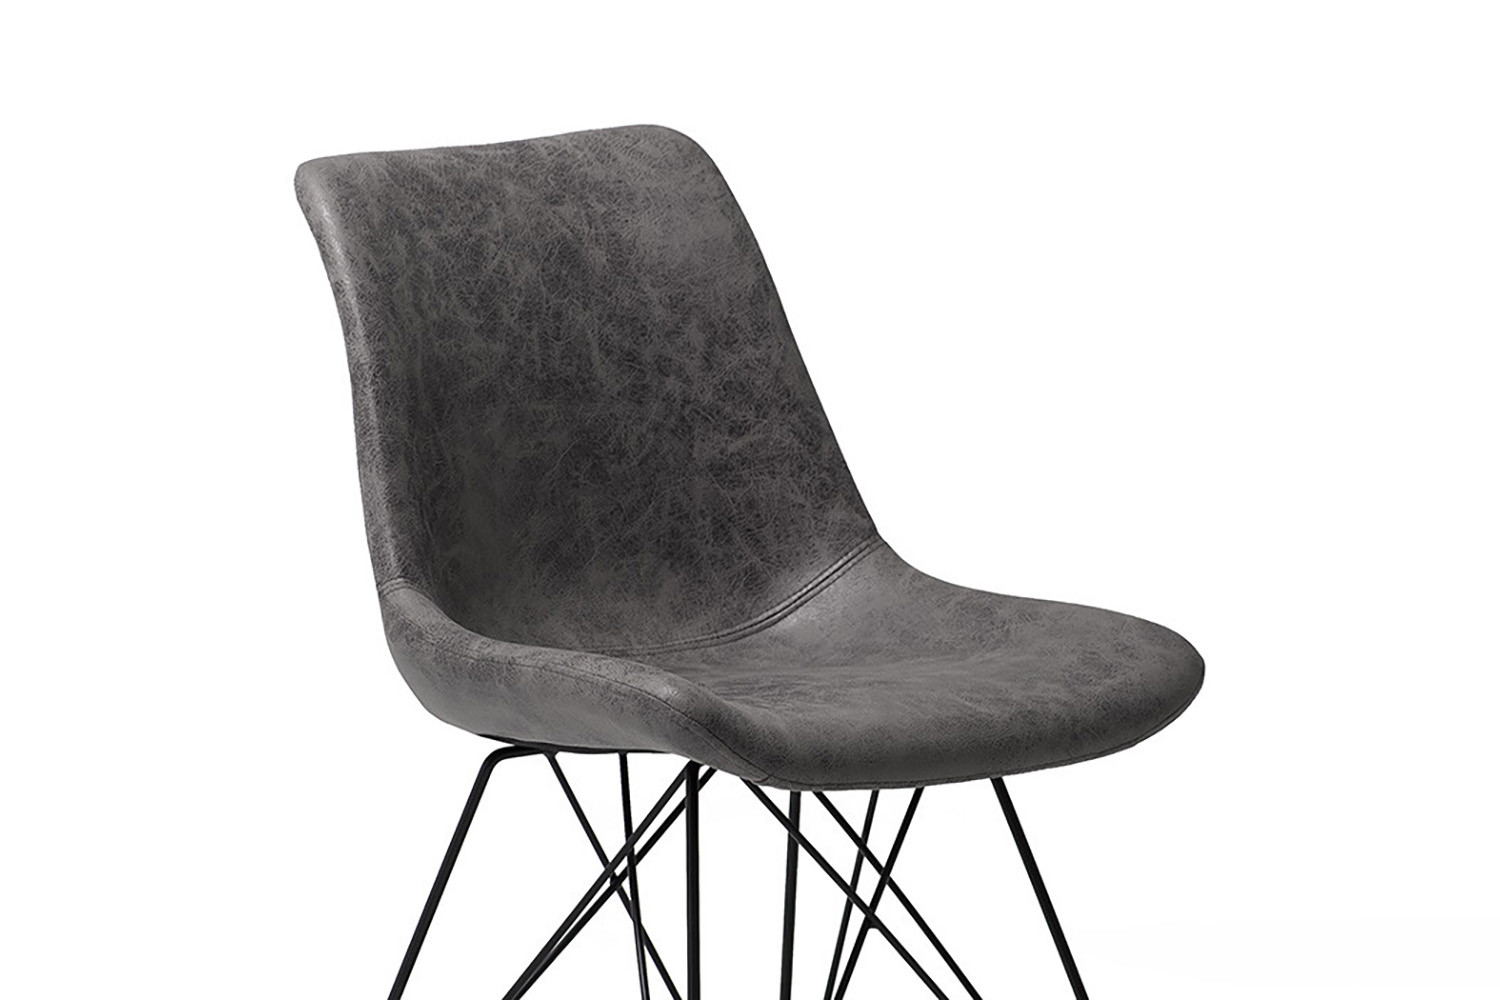 Hapton Dining Chair - Grey For Sale | Cielo